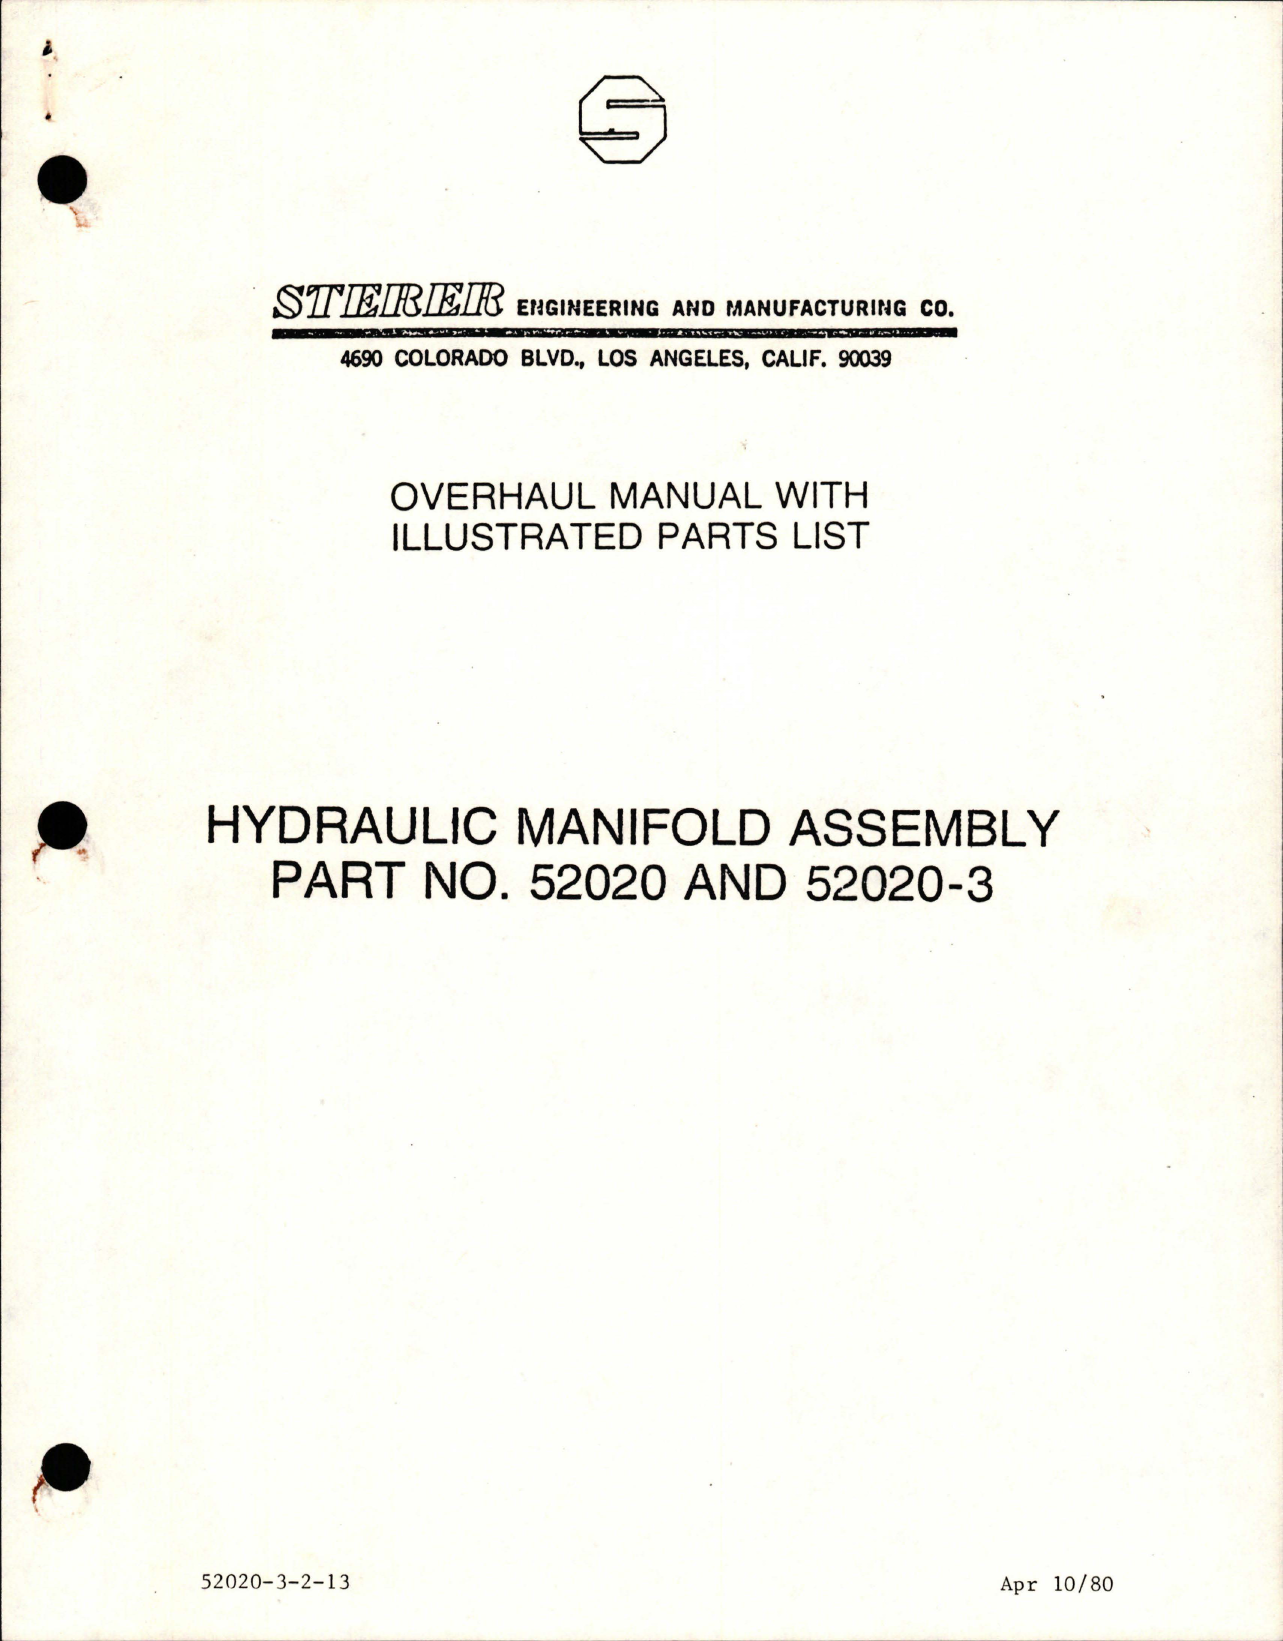 Sample page 1 from AirCorps Library document: Overhaul Manual with Illustrated Parts List for Hydraulic Manifold Assembly - Part 52020, 52020-3